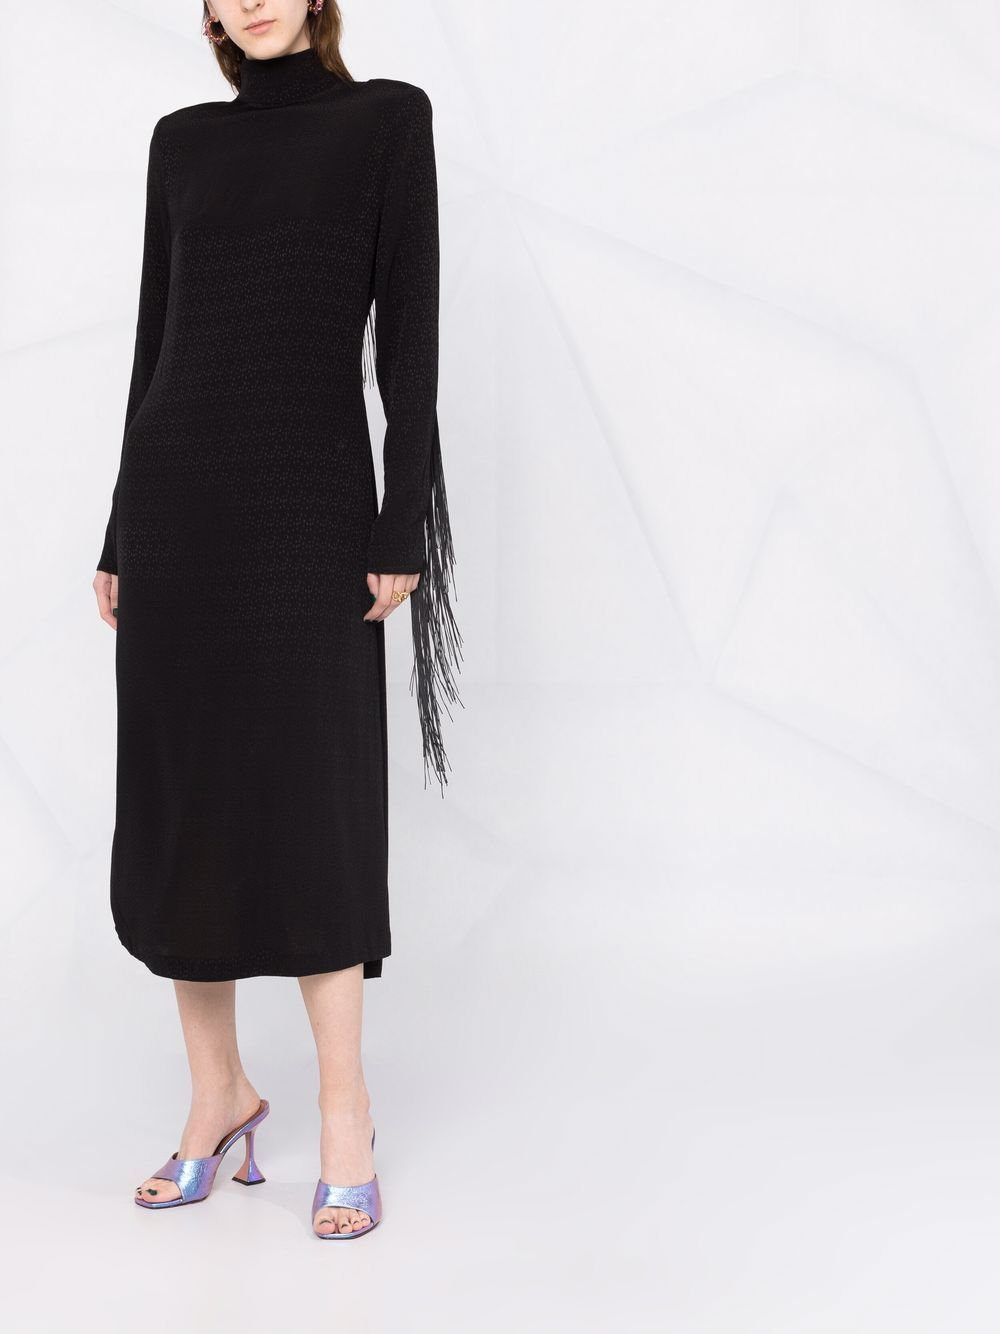 Shop ROTATE fringed high-neck midi dress with Express Delivery - FARFETCH